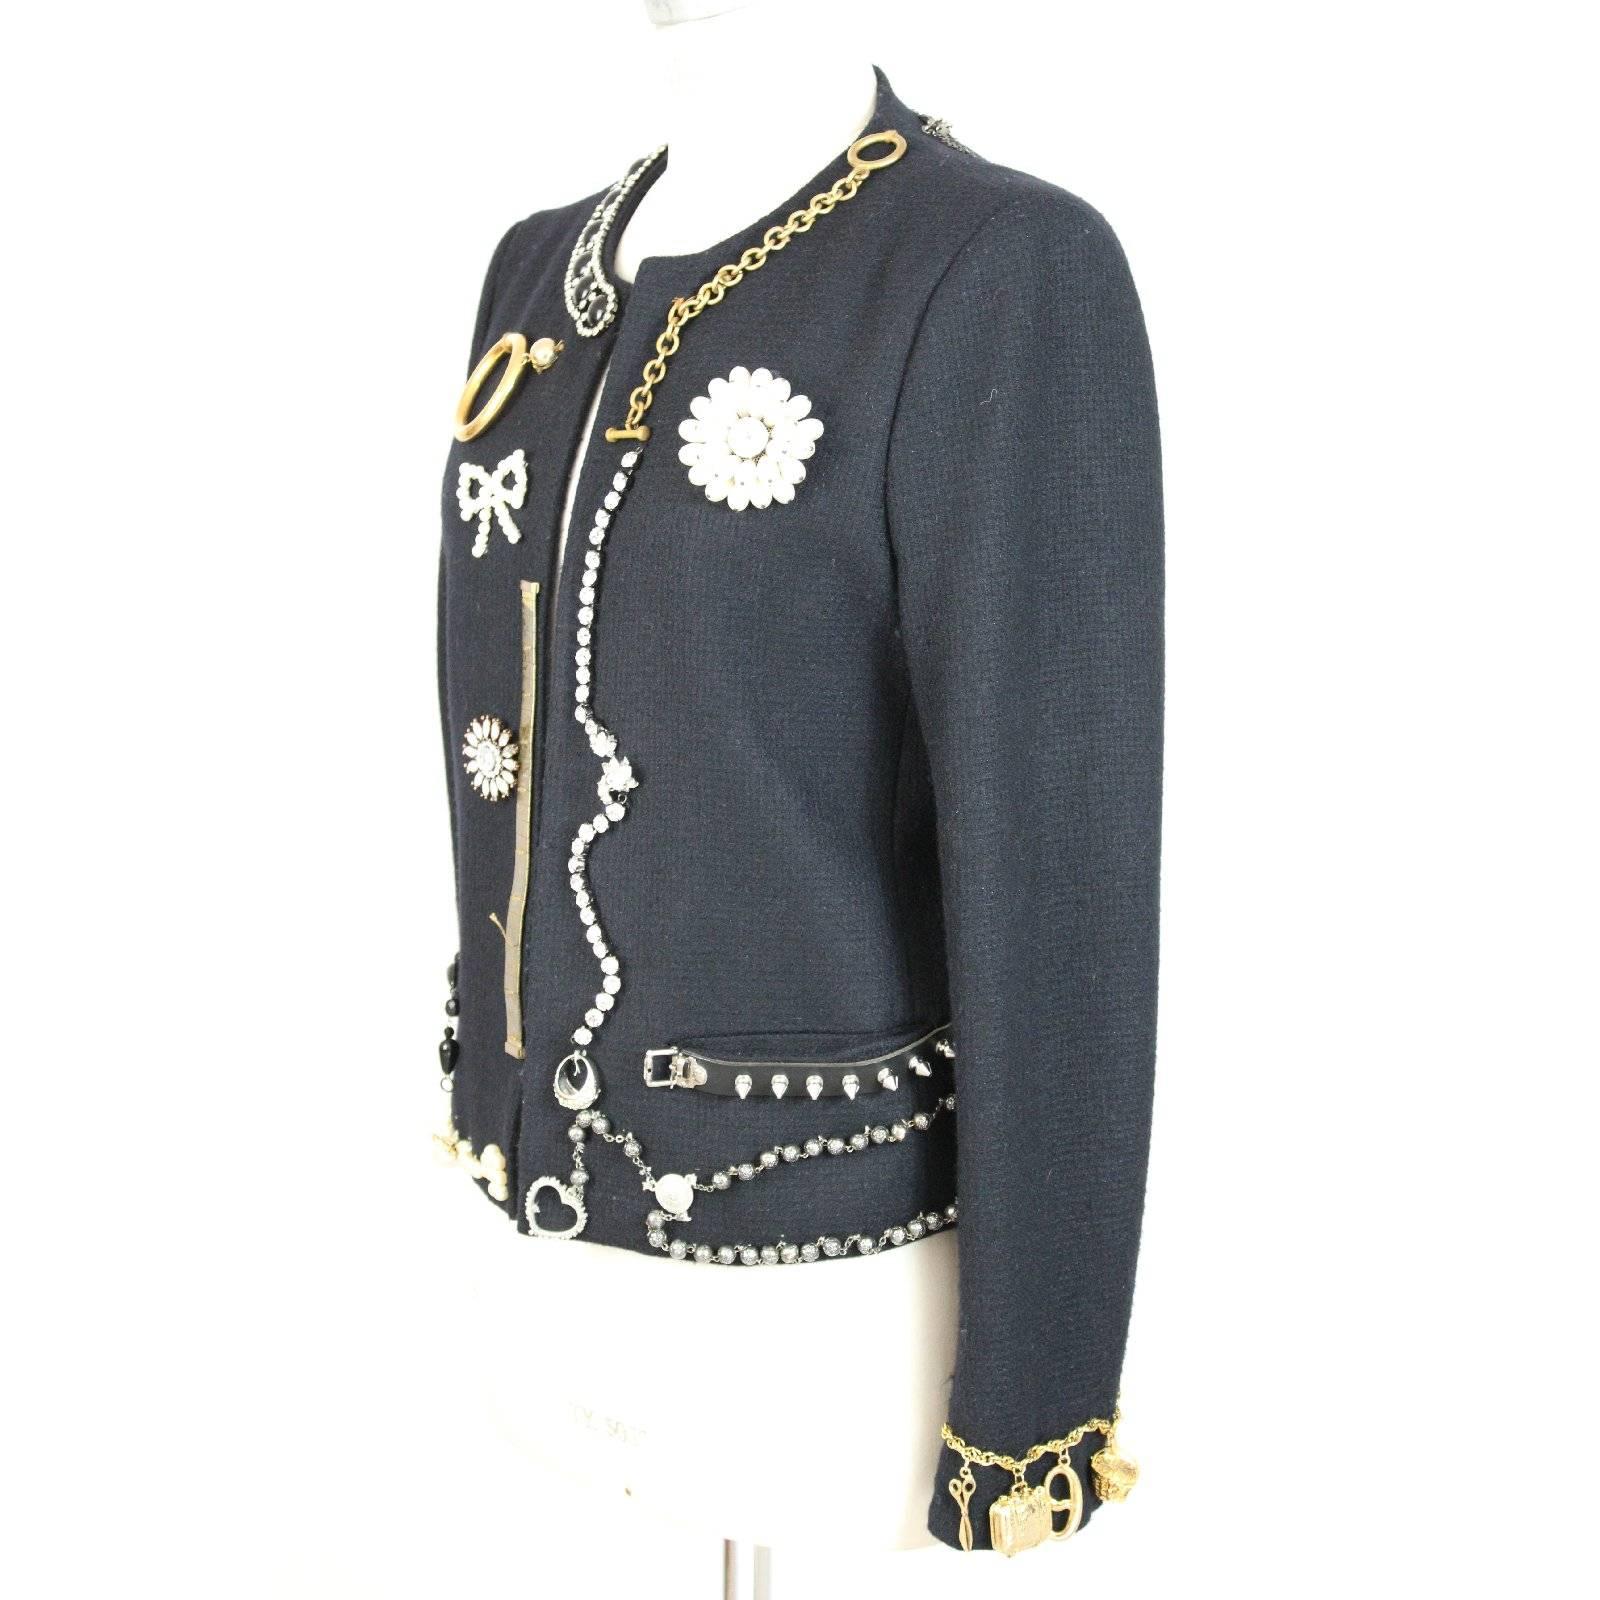 Moschino rare vintage blue jacket. The jacket has various applications. Chains, necklaces, jewelry, rings and pearls make this jacket unique. An artwork made in italy. These jackets were produced in limited edition. The fabric is 100% virgin wool.